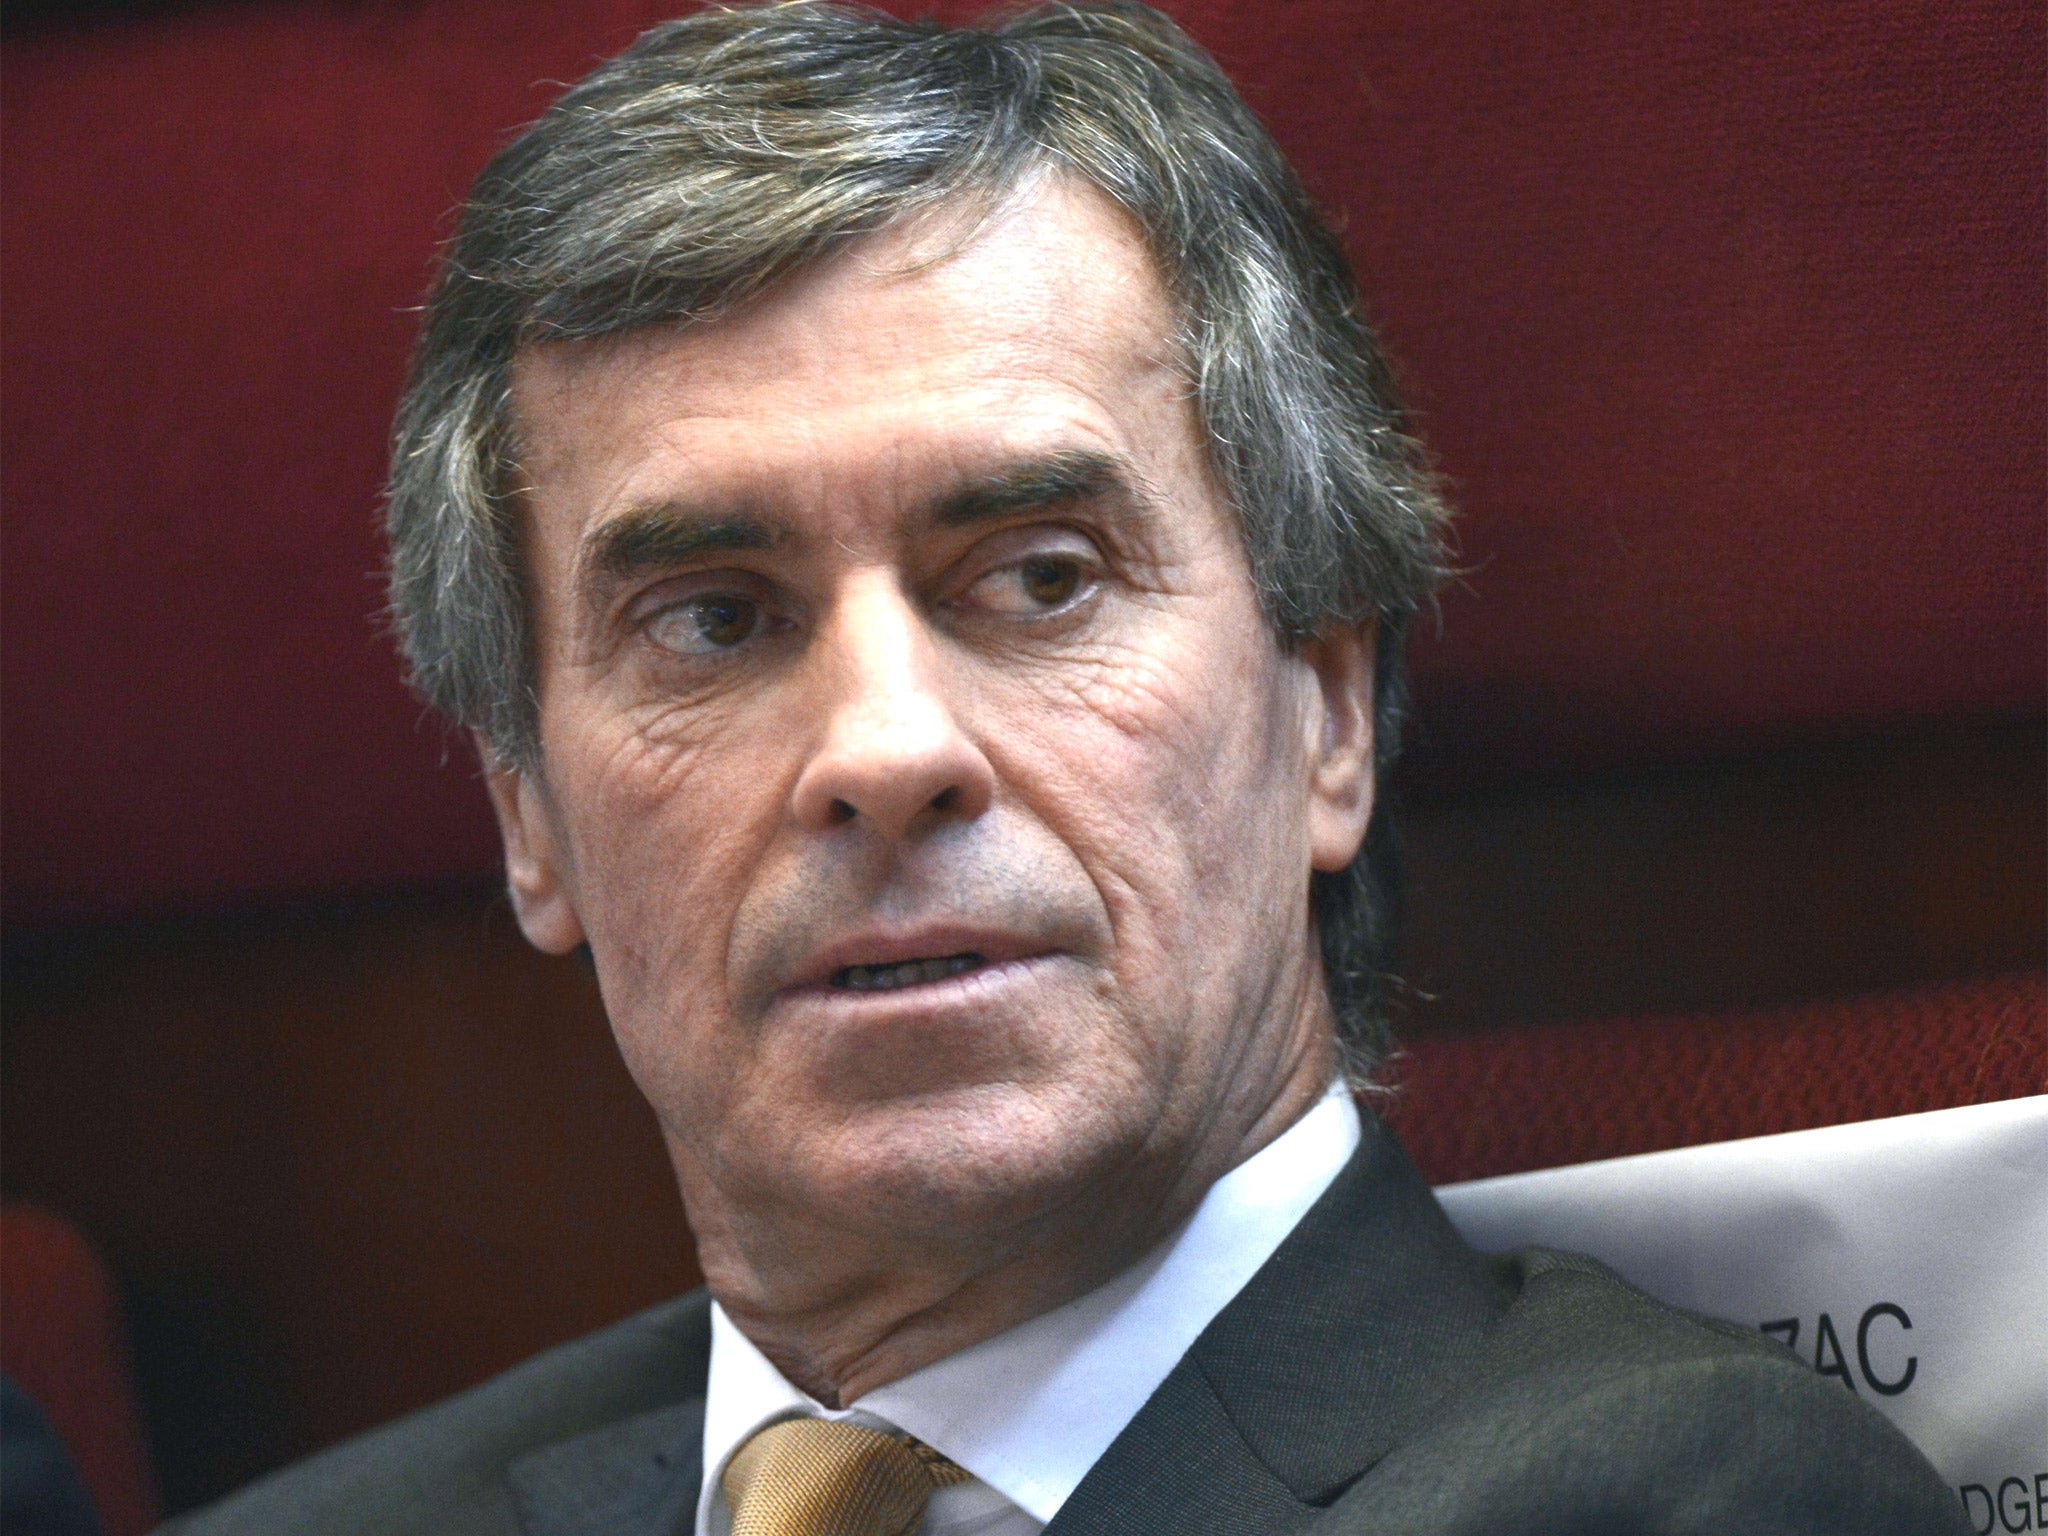 Jérôme Cahuzac welcomed news of the investigation